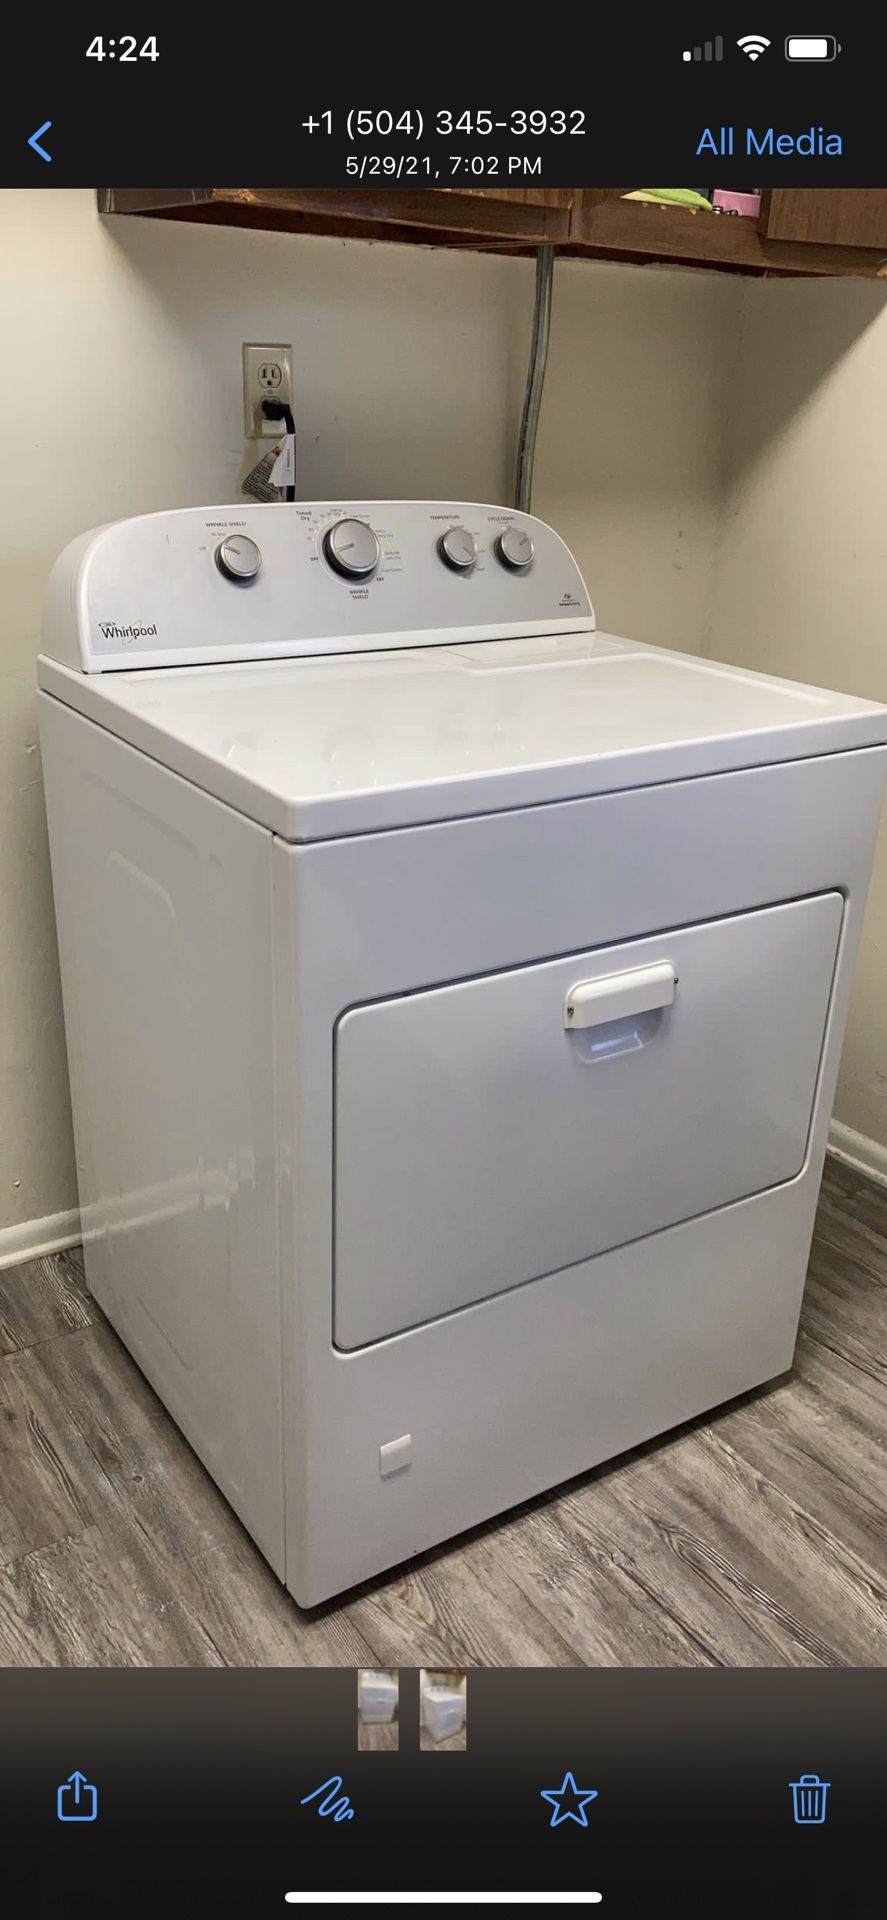 Whirlpool gas dryer two years old